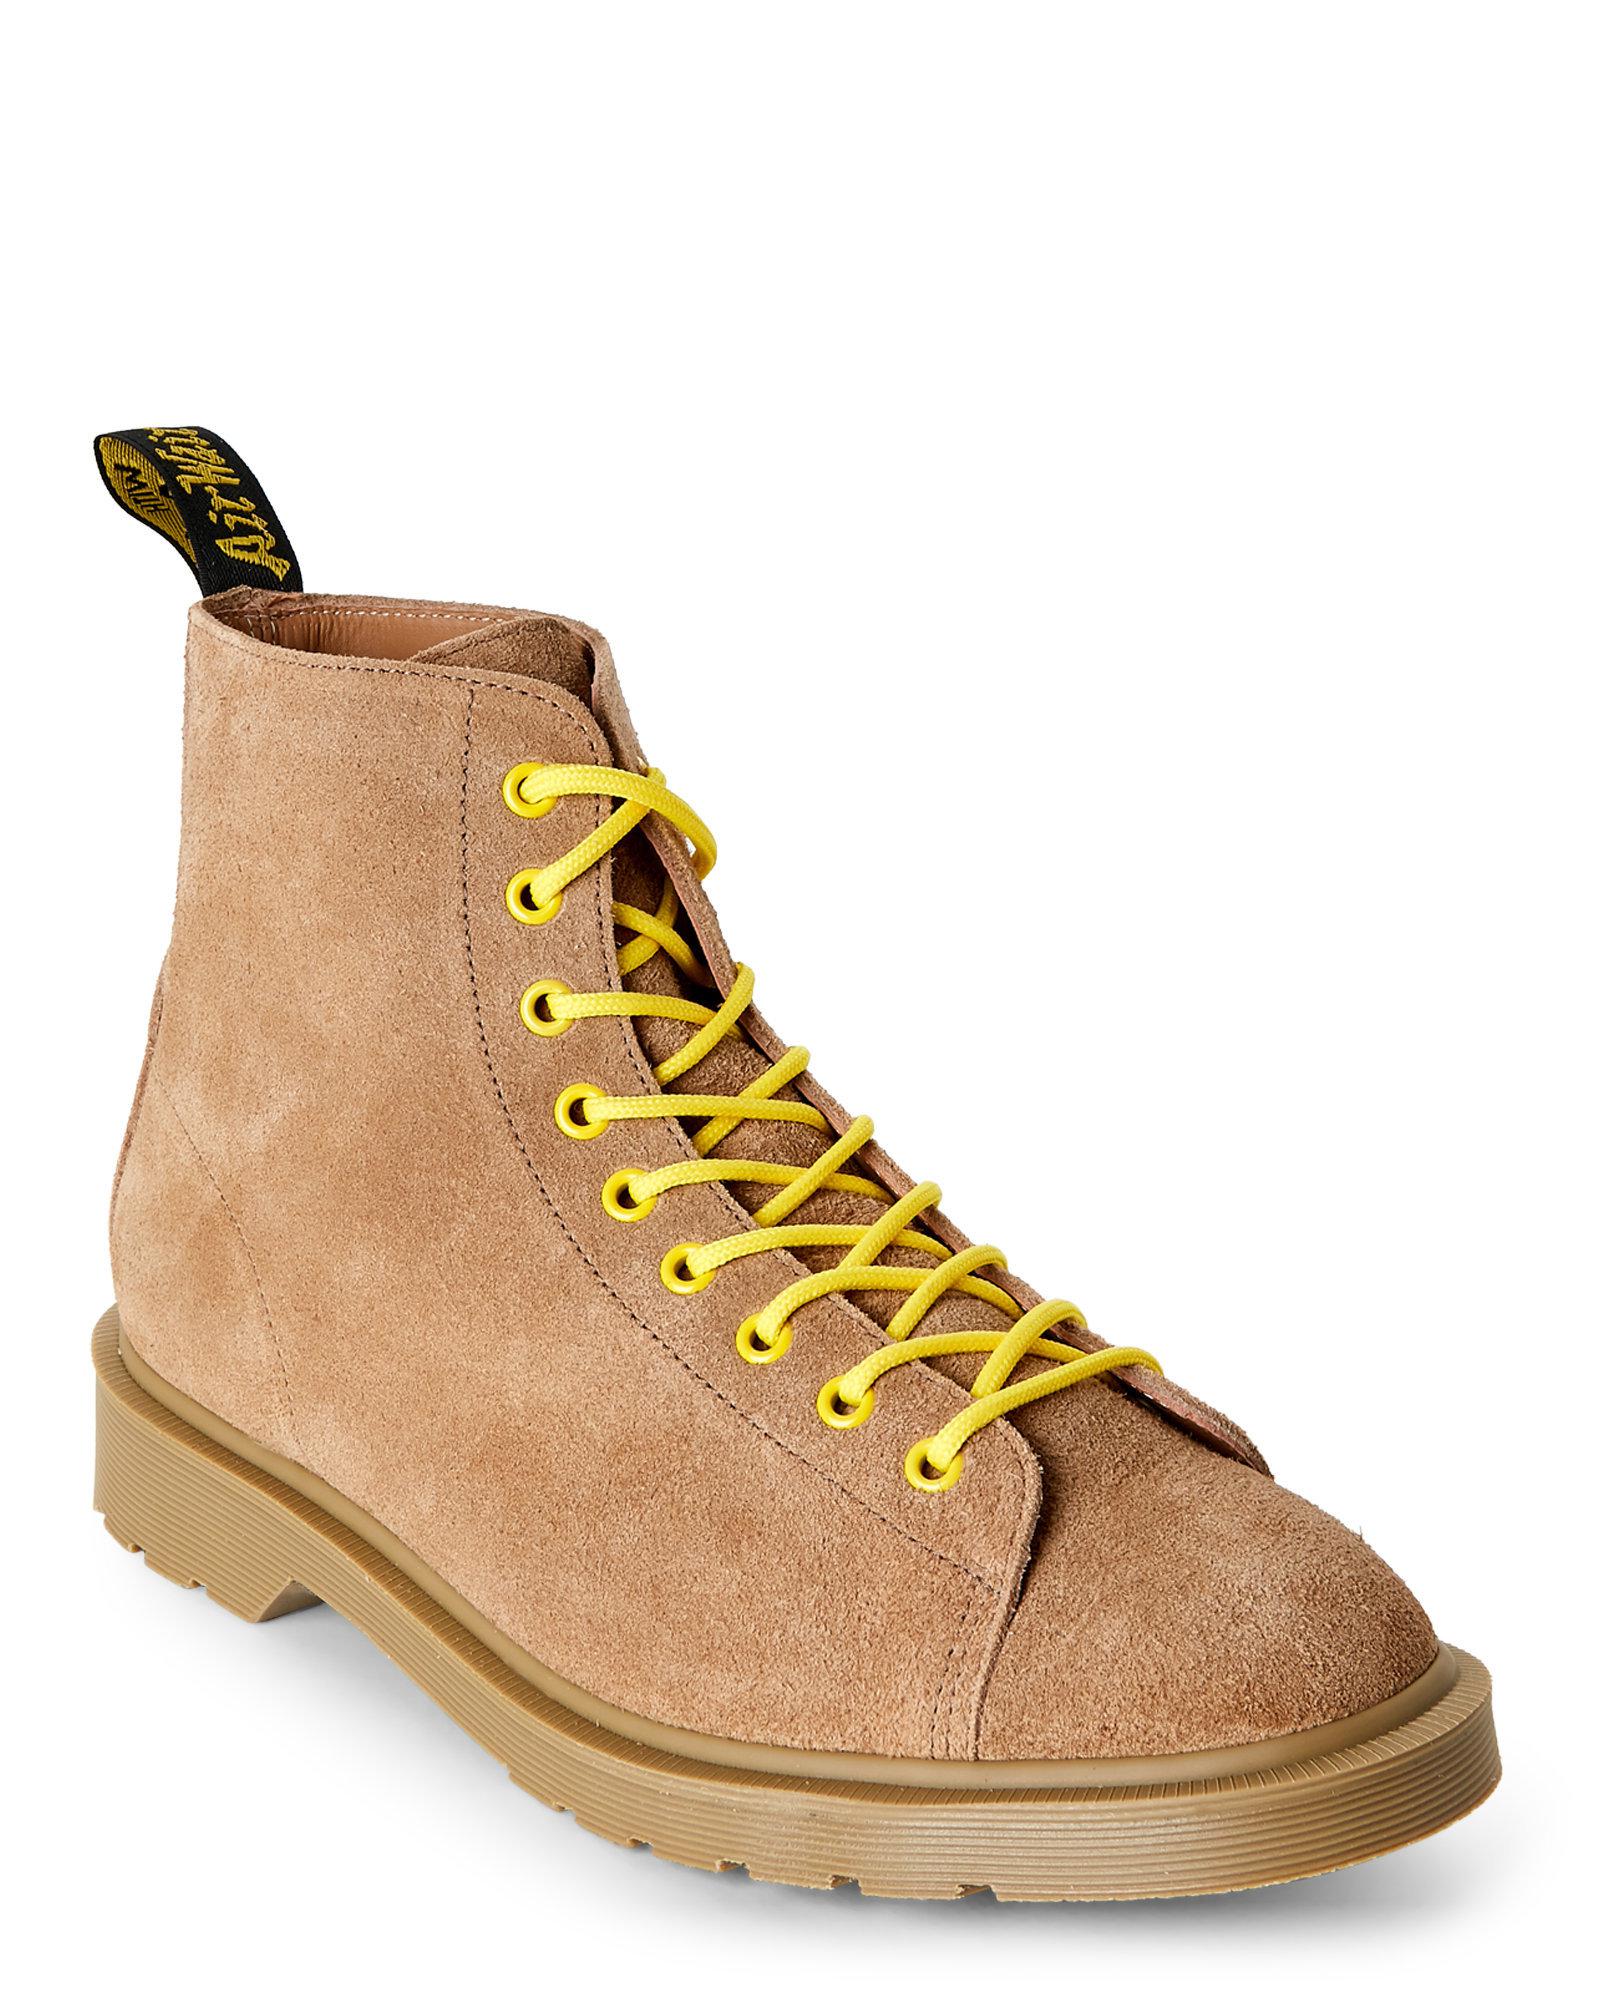 Off-White c/o Virgil Abloh Sand Les Suede Boots in Light Brown (Brown) for Men - Lyst